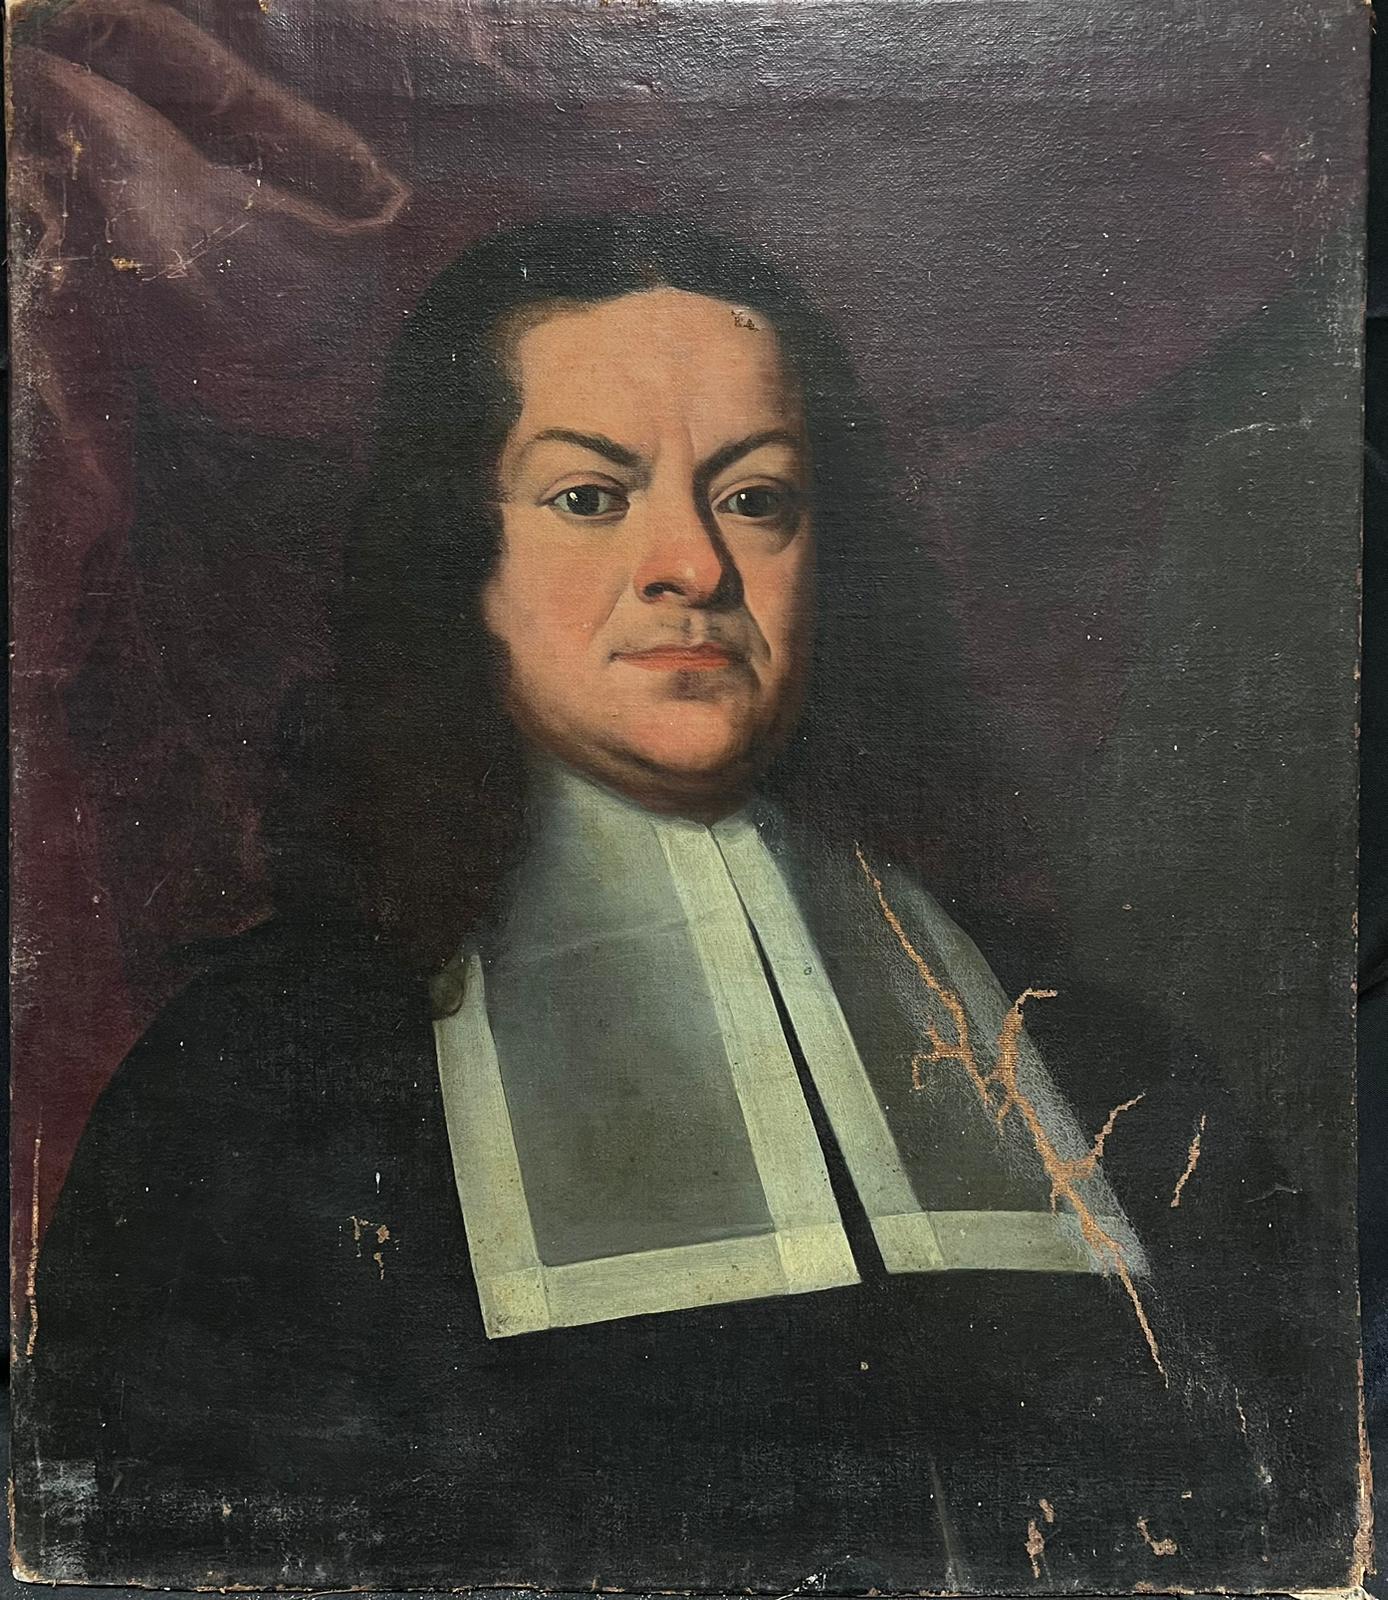 Portrait of a Clerical Gentleman
Italian artist, mid 18th century
Circle of Giovanni Battista Carboni (1725-1790)
oil on canvas, unframed
canvas: 26 x 22 inches
provenance: private collection, England
condition: overall good and sound condition